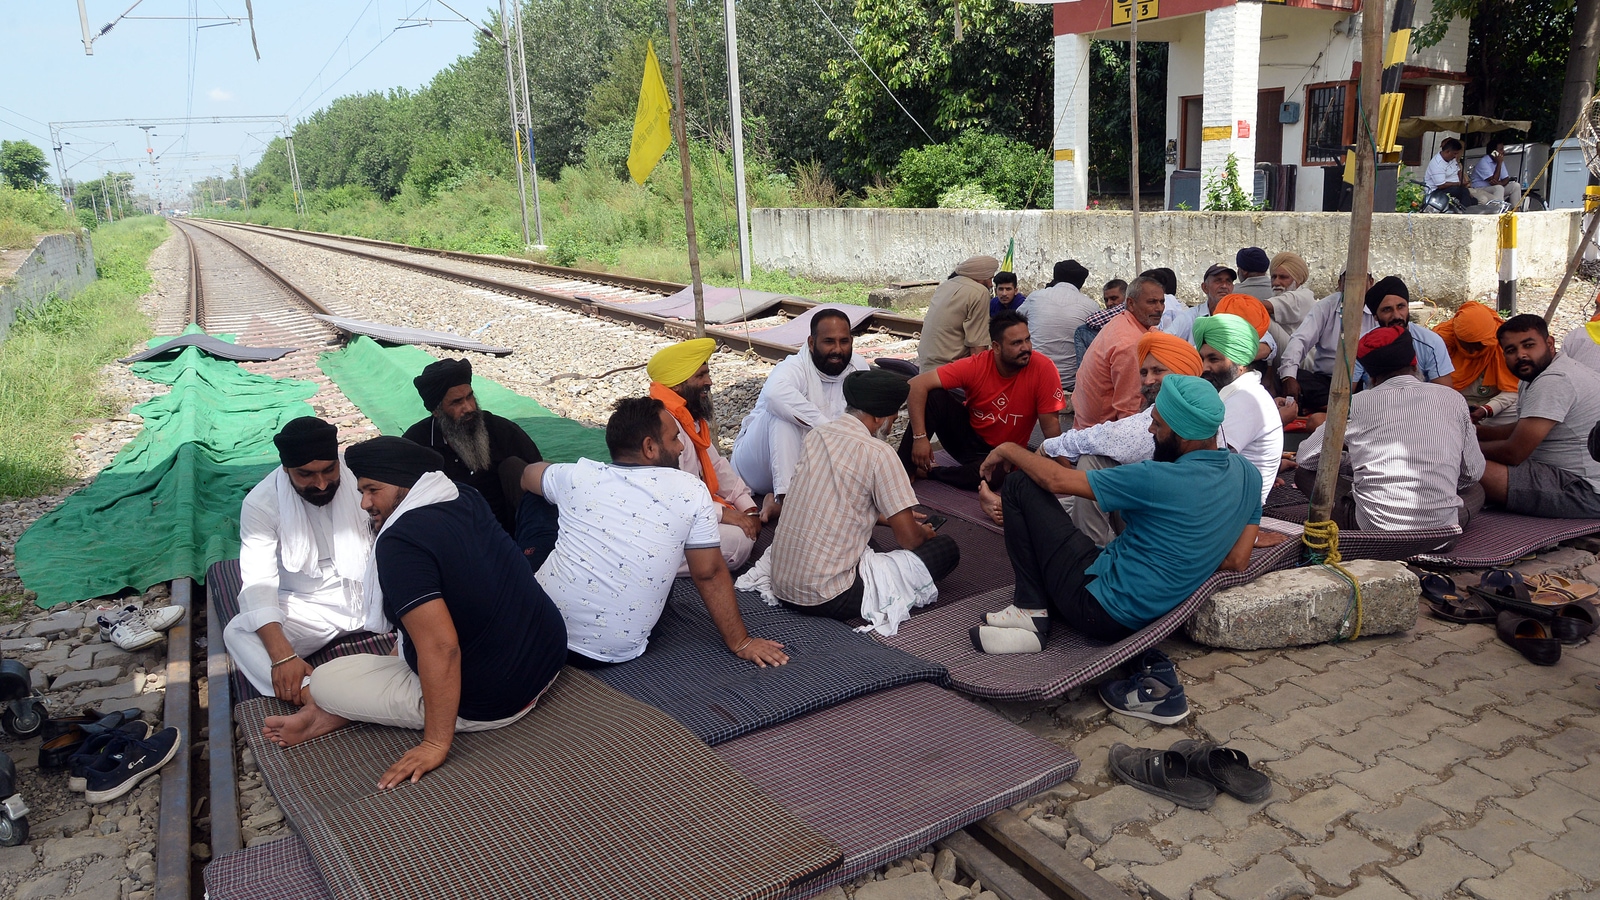 Punjab farmers&#39; protest: Railway to refund ₹53 lakh to over 12,000 passengers | Latest News India - Hindustan Times